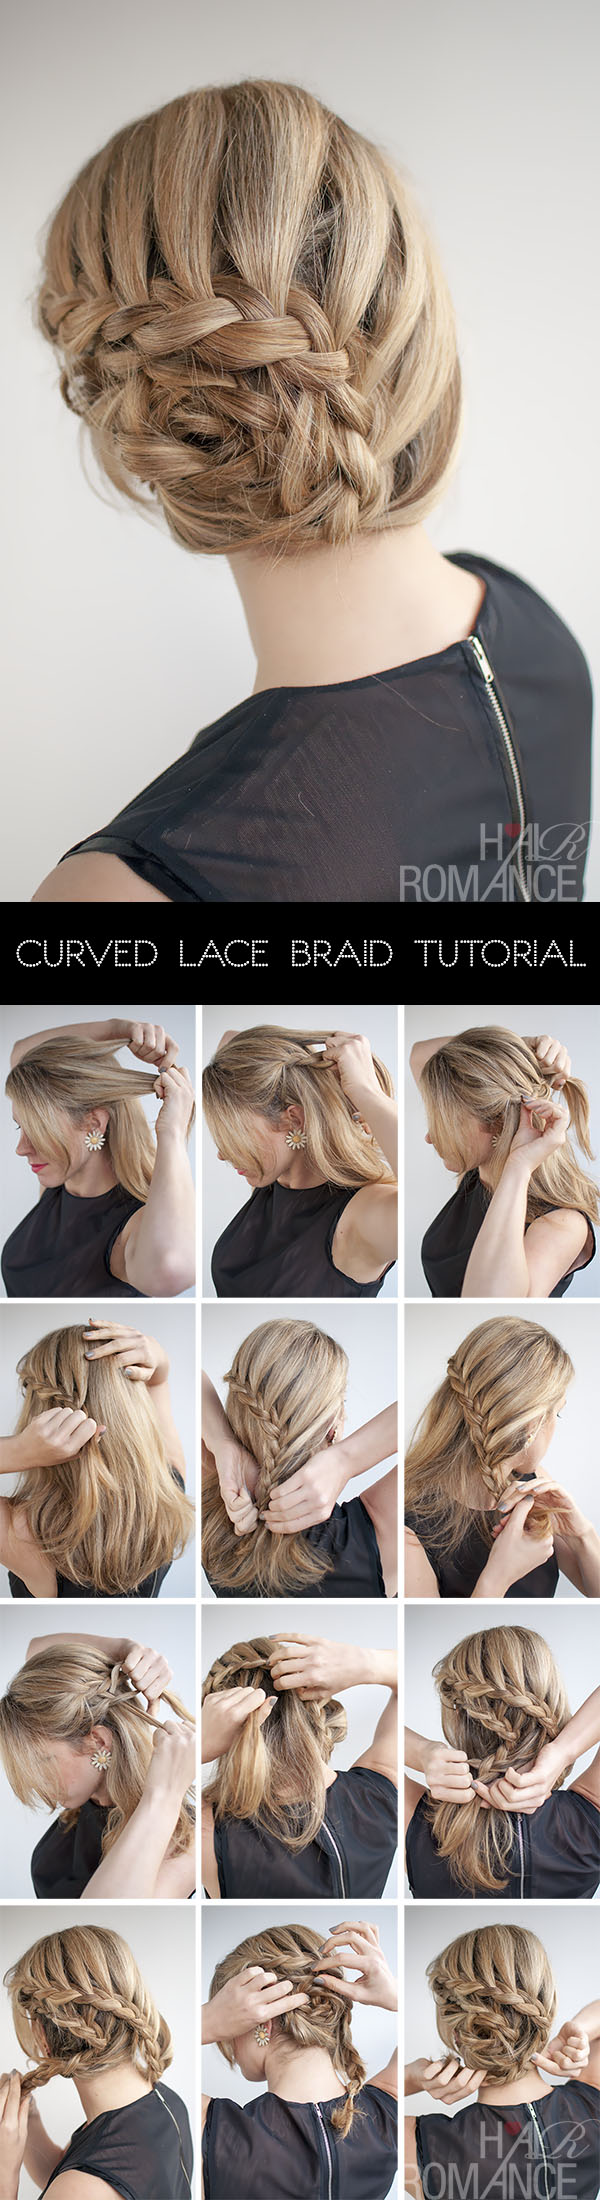 Hair-Romance-curved-lace-braid-updo-hairstyle-tutorial